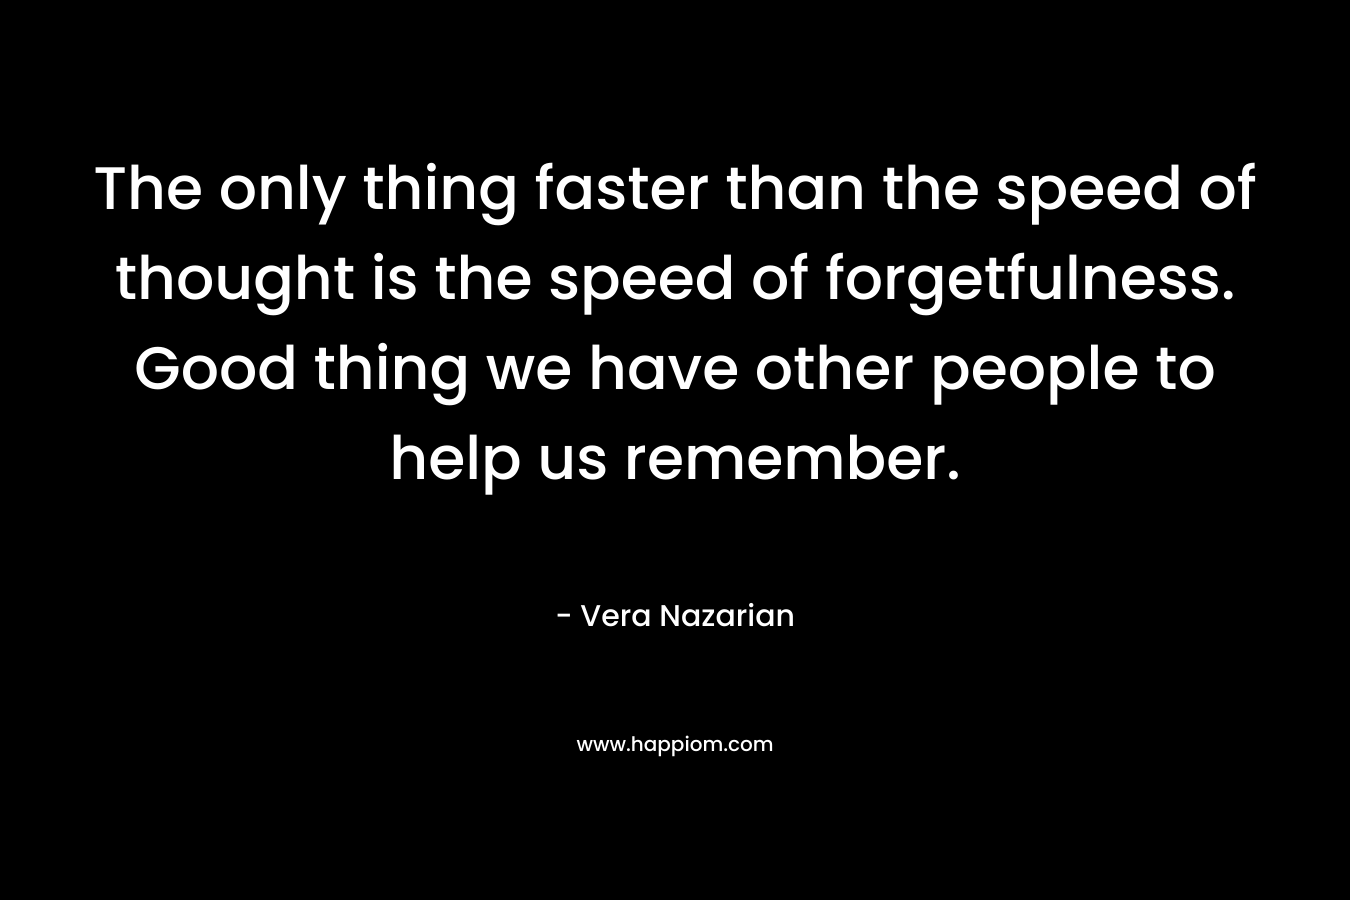 The only thing faster than the speed of thought is the speed of forgetfulness. Good thing we have other people to help us remember.